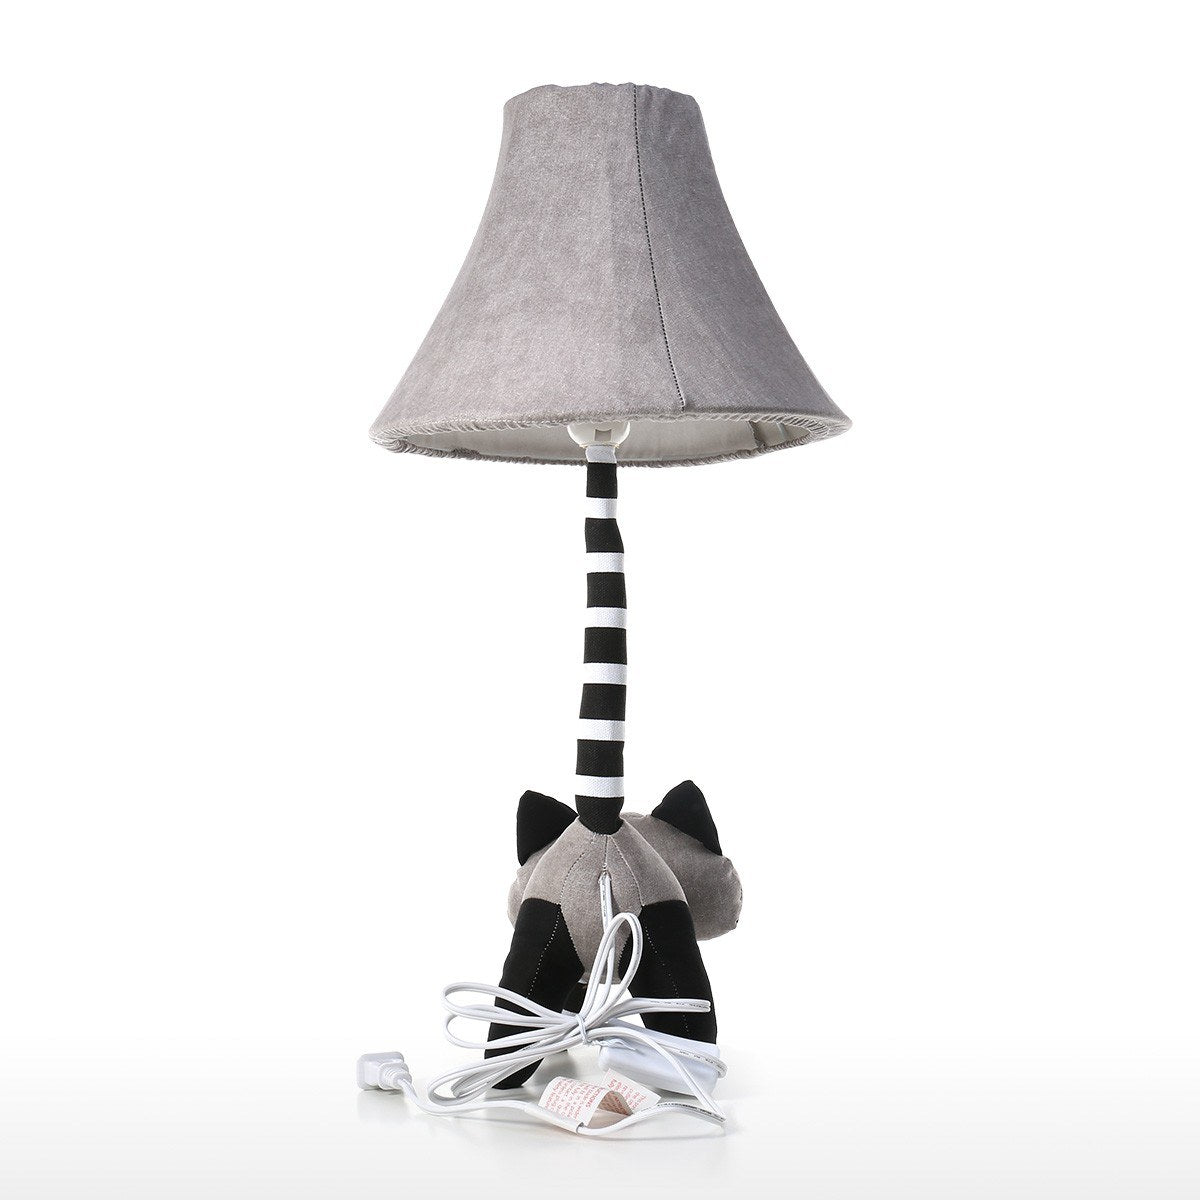 Decorative Table Lamp and Kids Table Lamp with Black and White Raccoon Decor for Nursery